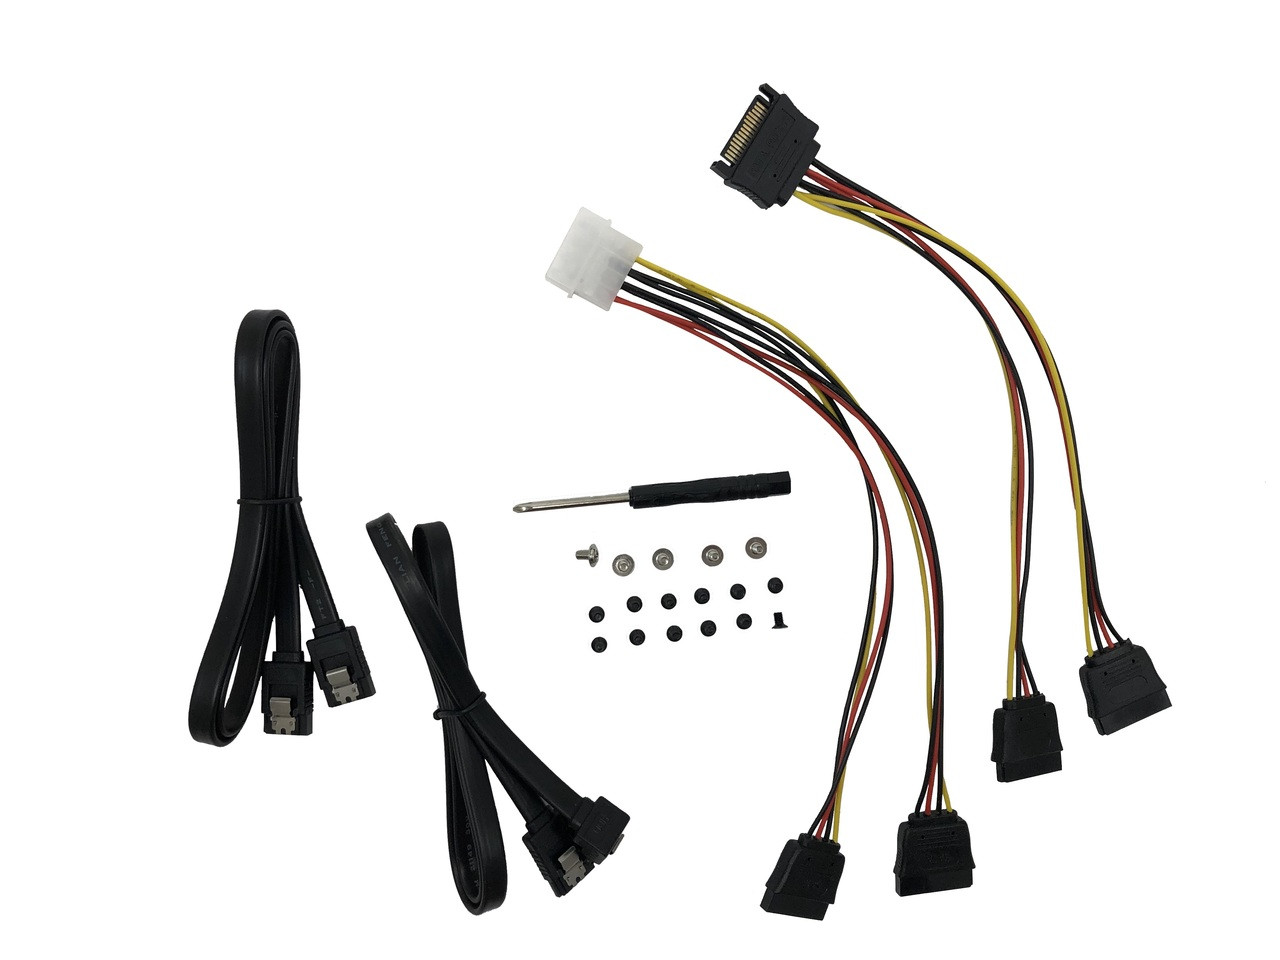 2.5in SSD/Hard Drive Installation Kit For Two (2) 2.5” SSD/HDD 3.5” Drive Bay with SATA and Power Cables - Micro Connectors,